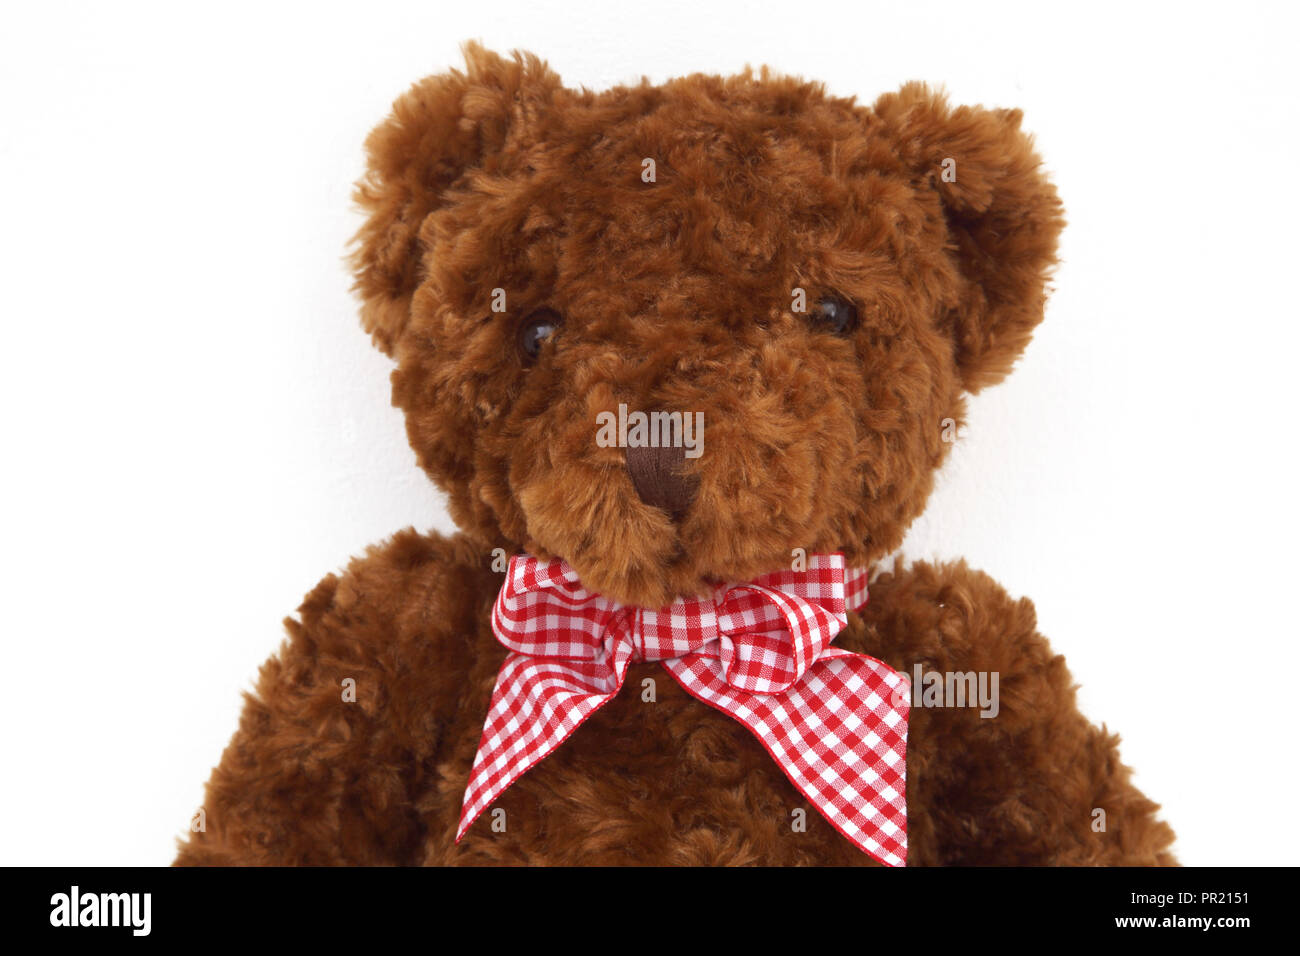 brown teddy bear with red bow tie